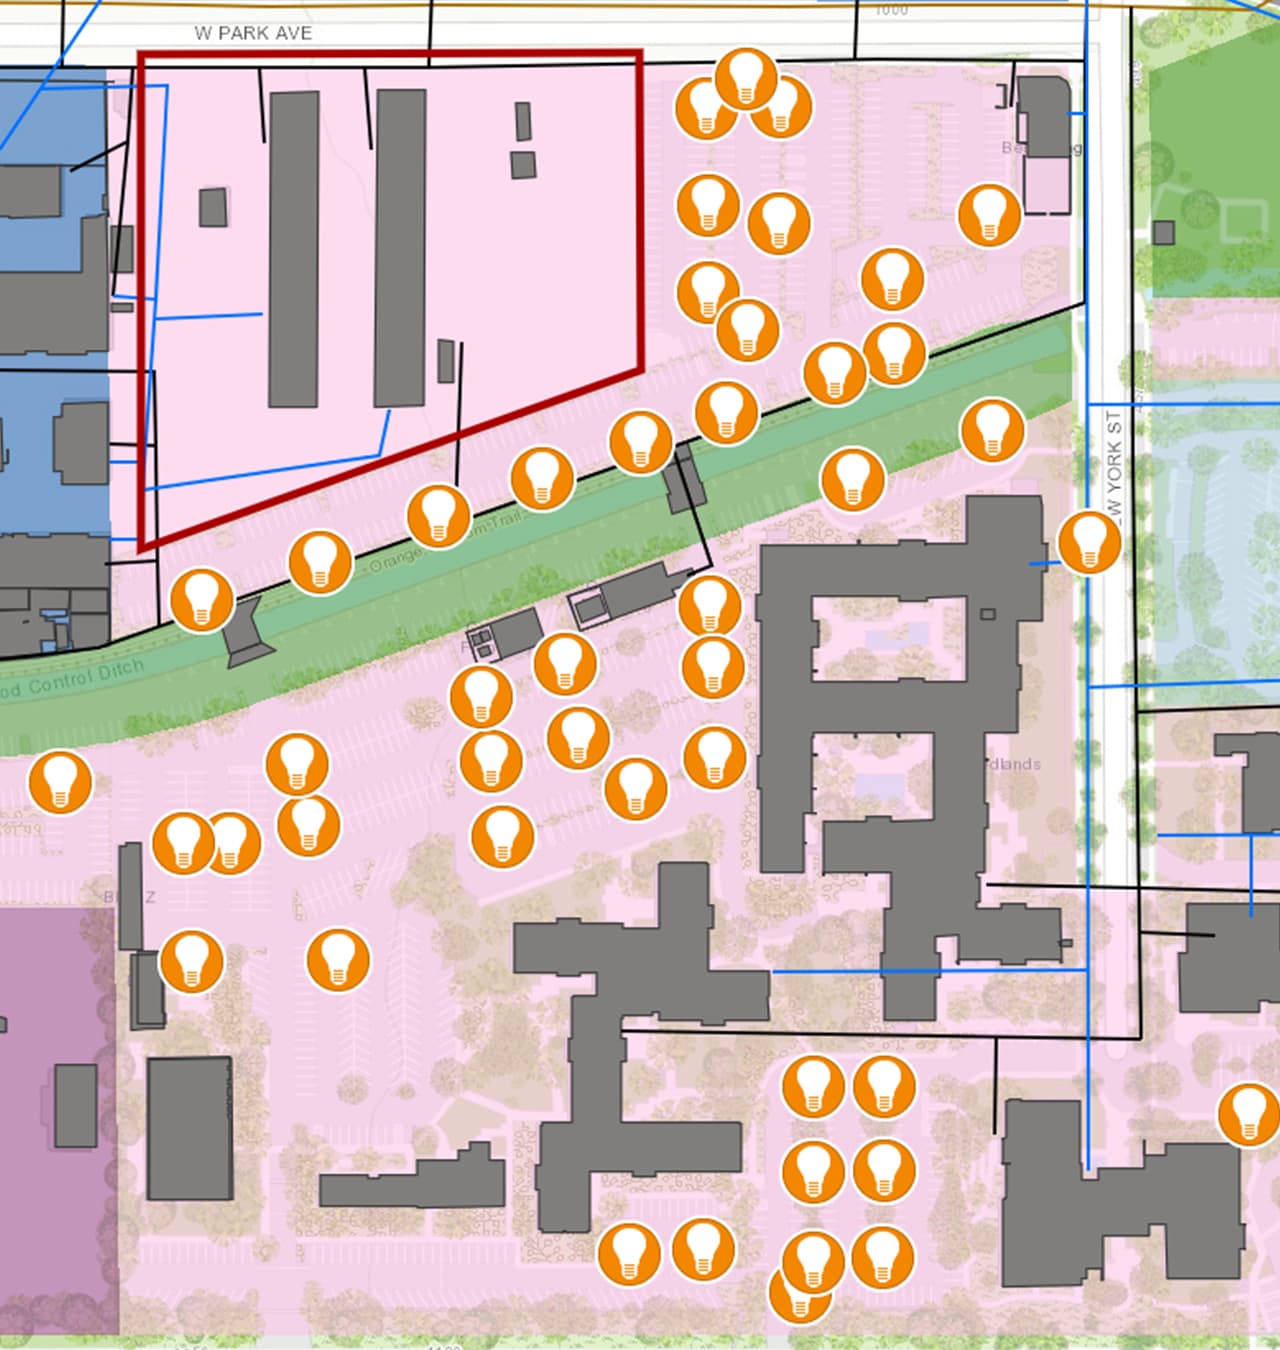 Tagged assets on 2D top-down view of project site